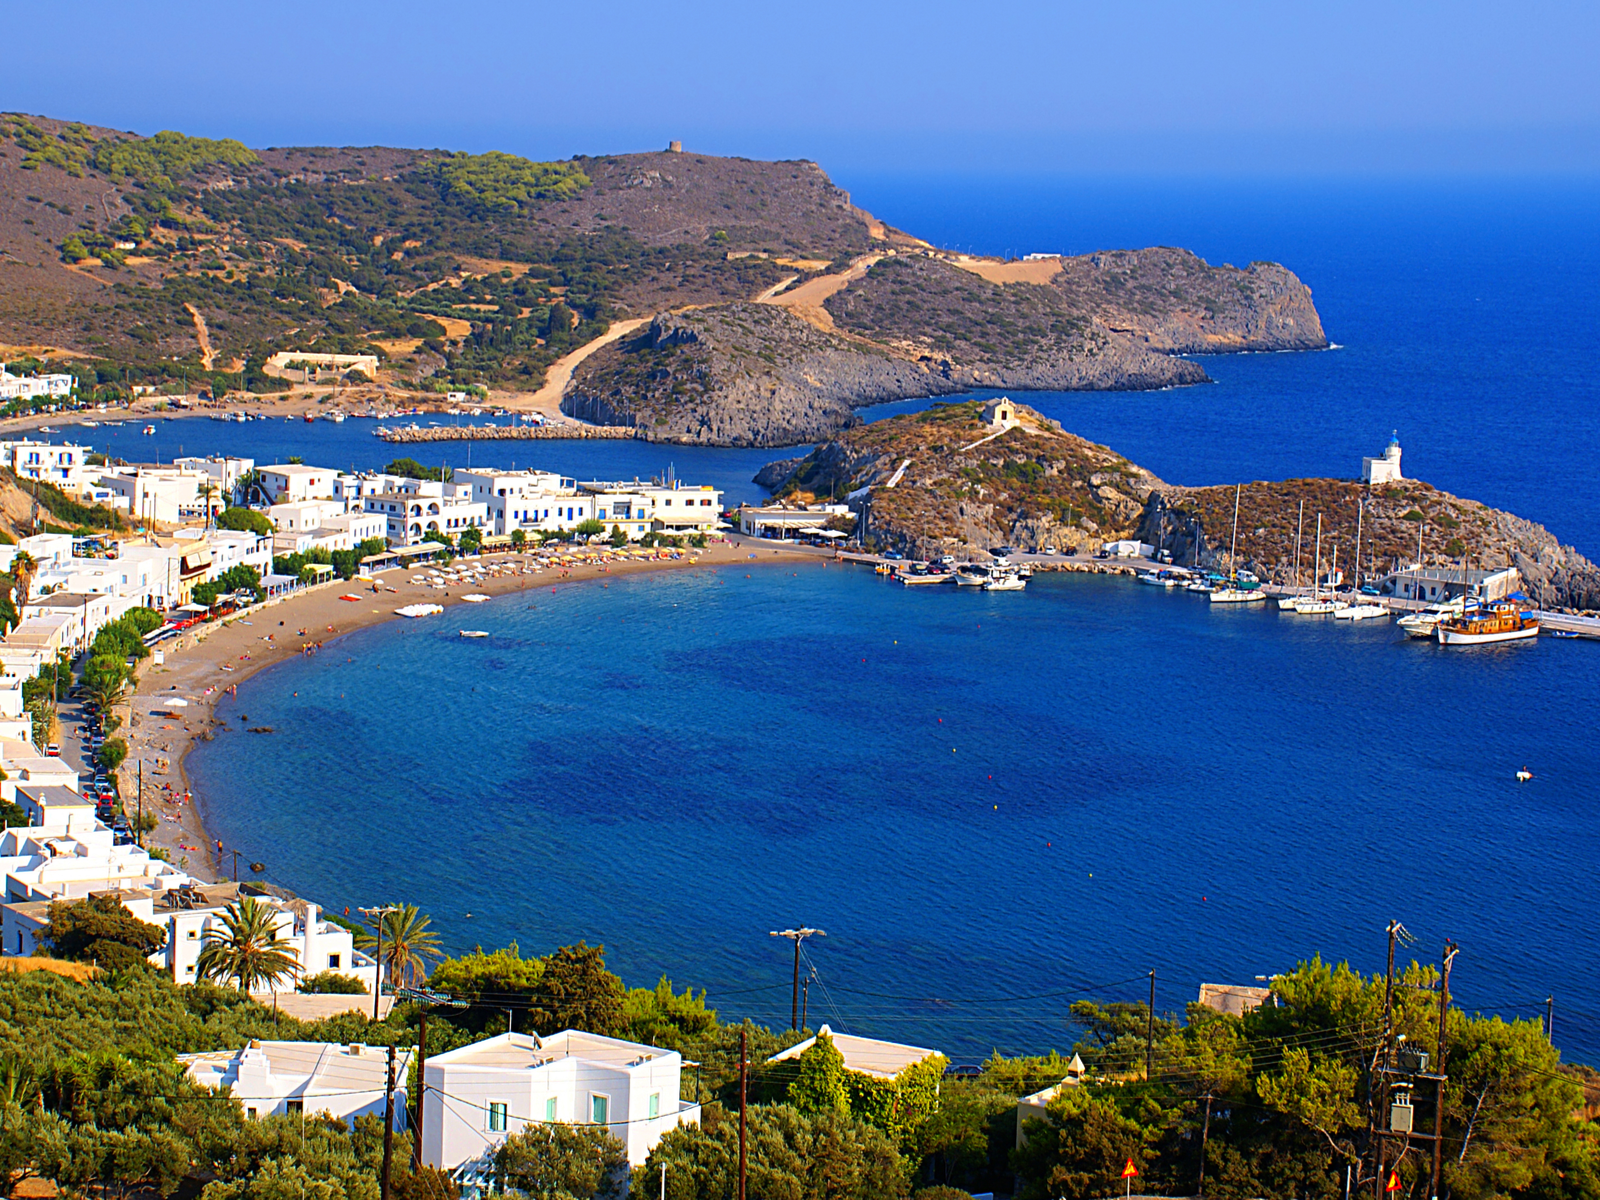 Beautiful white structures lined up by the beach at Kapsali Village in Kythira Island, one of the best places to visit in Greece